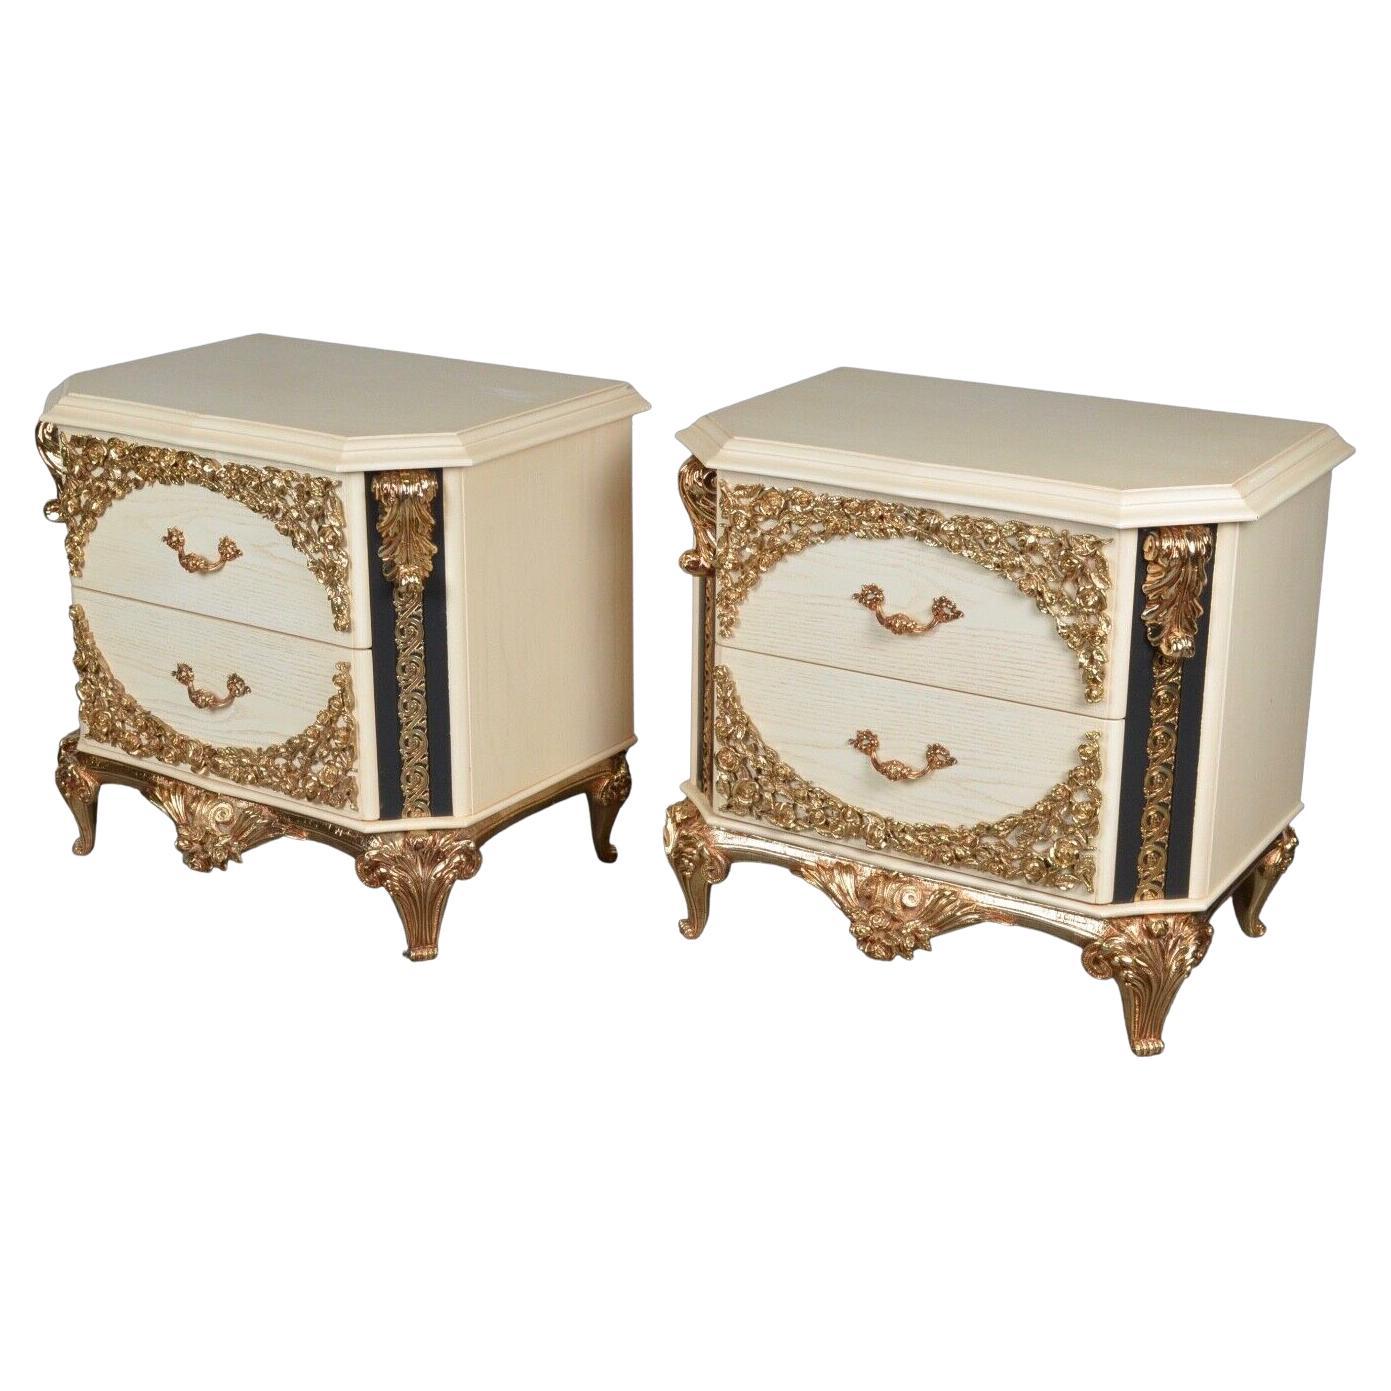 Exclusive Pair of Vidal Grau Bedside Tables, C1970 /Matching Furniture Available For Sale